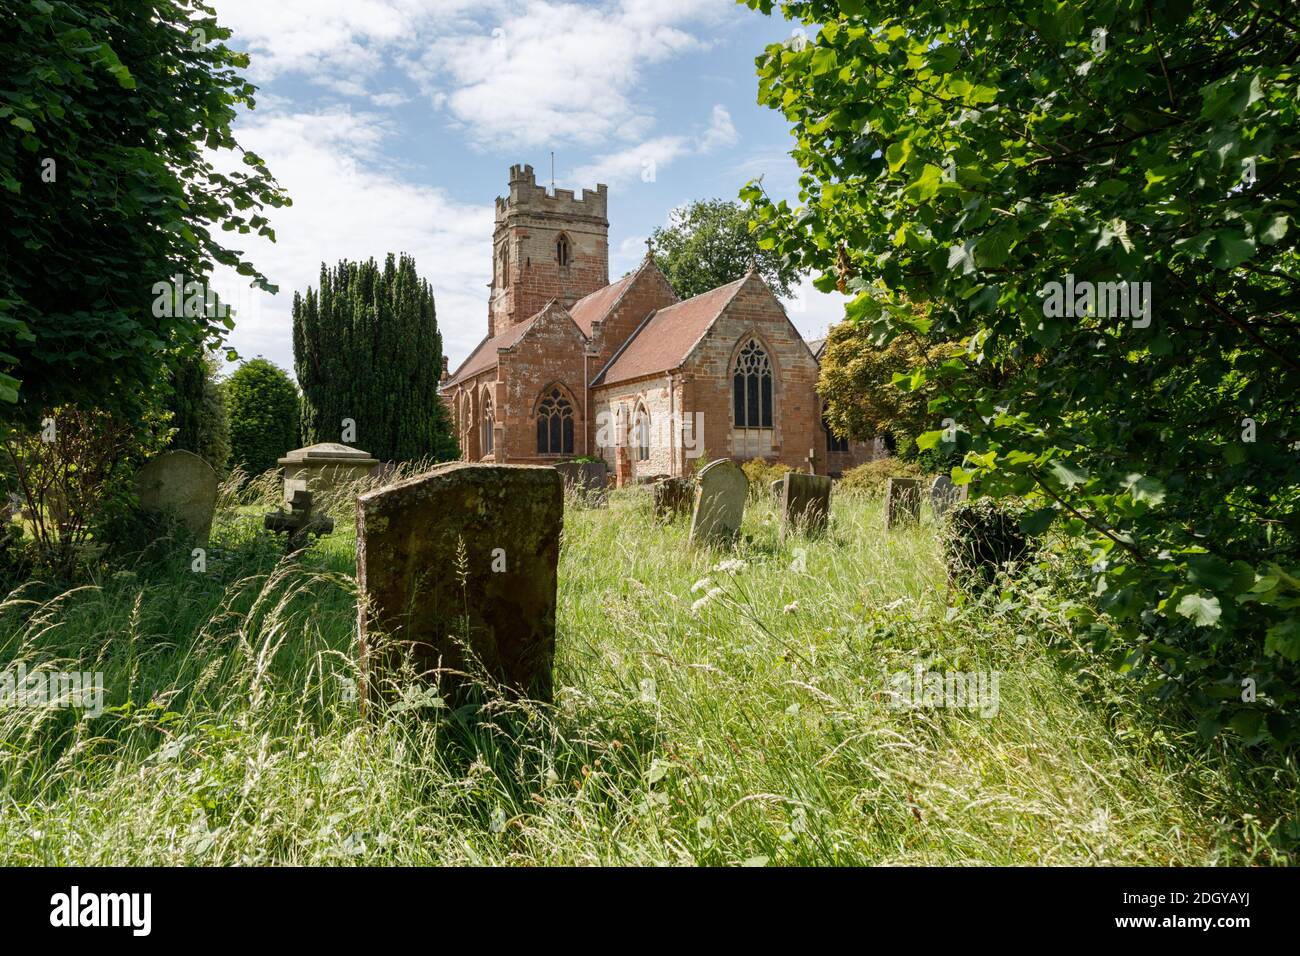 Dunchurch, Warwickshire, UK - 16/06/20: St. Peter's church in a partly overgrown churchyard from which old, stone gravestones stand in long grass. Stock Photo